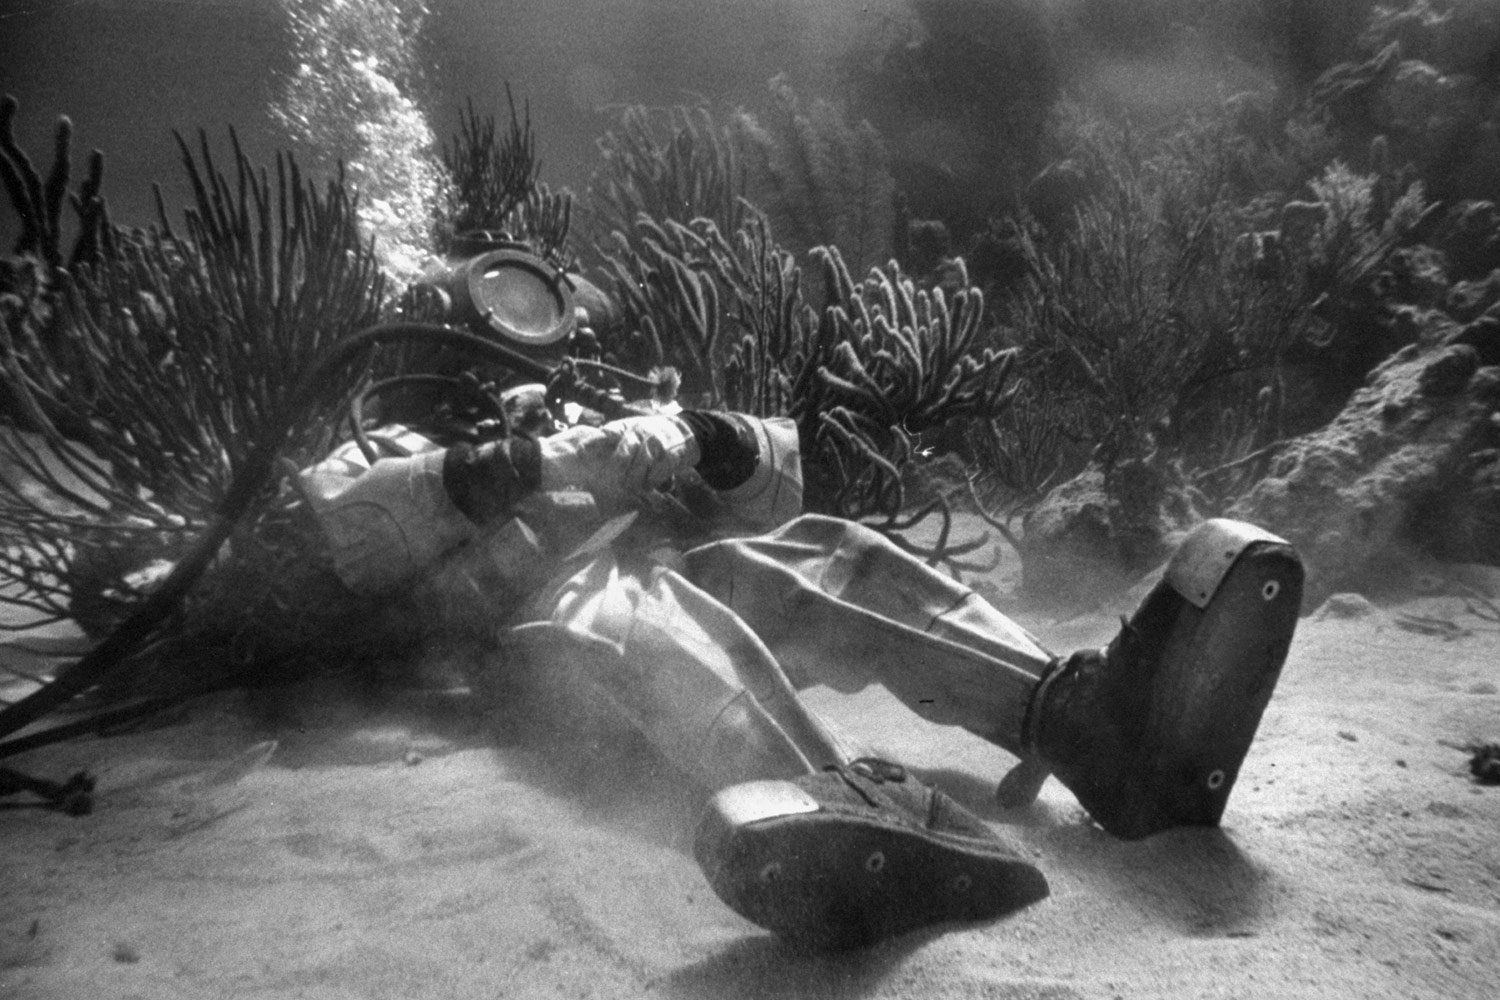 Frank Higgins takes a nap during production of "20,000 Leagues Under the Sea" in 1952.